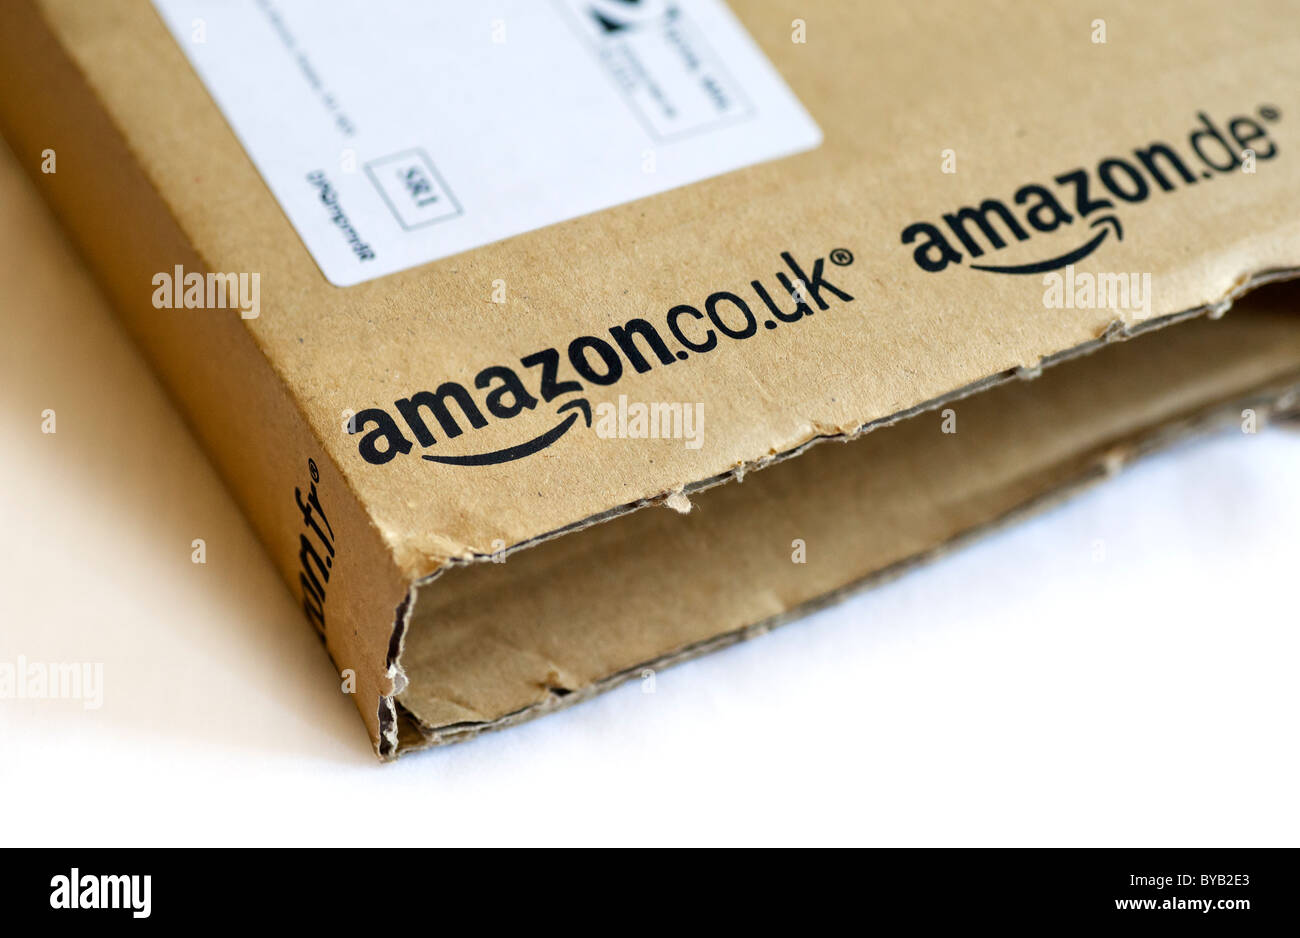 A package of books from Amazon, UK Stock Photo